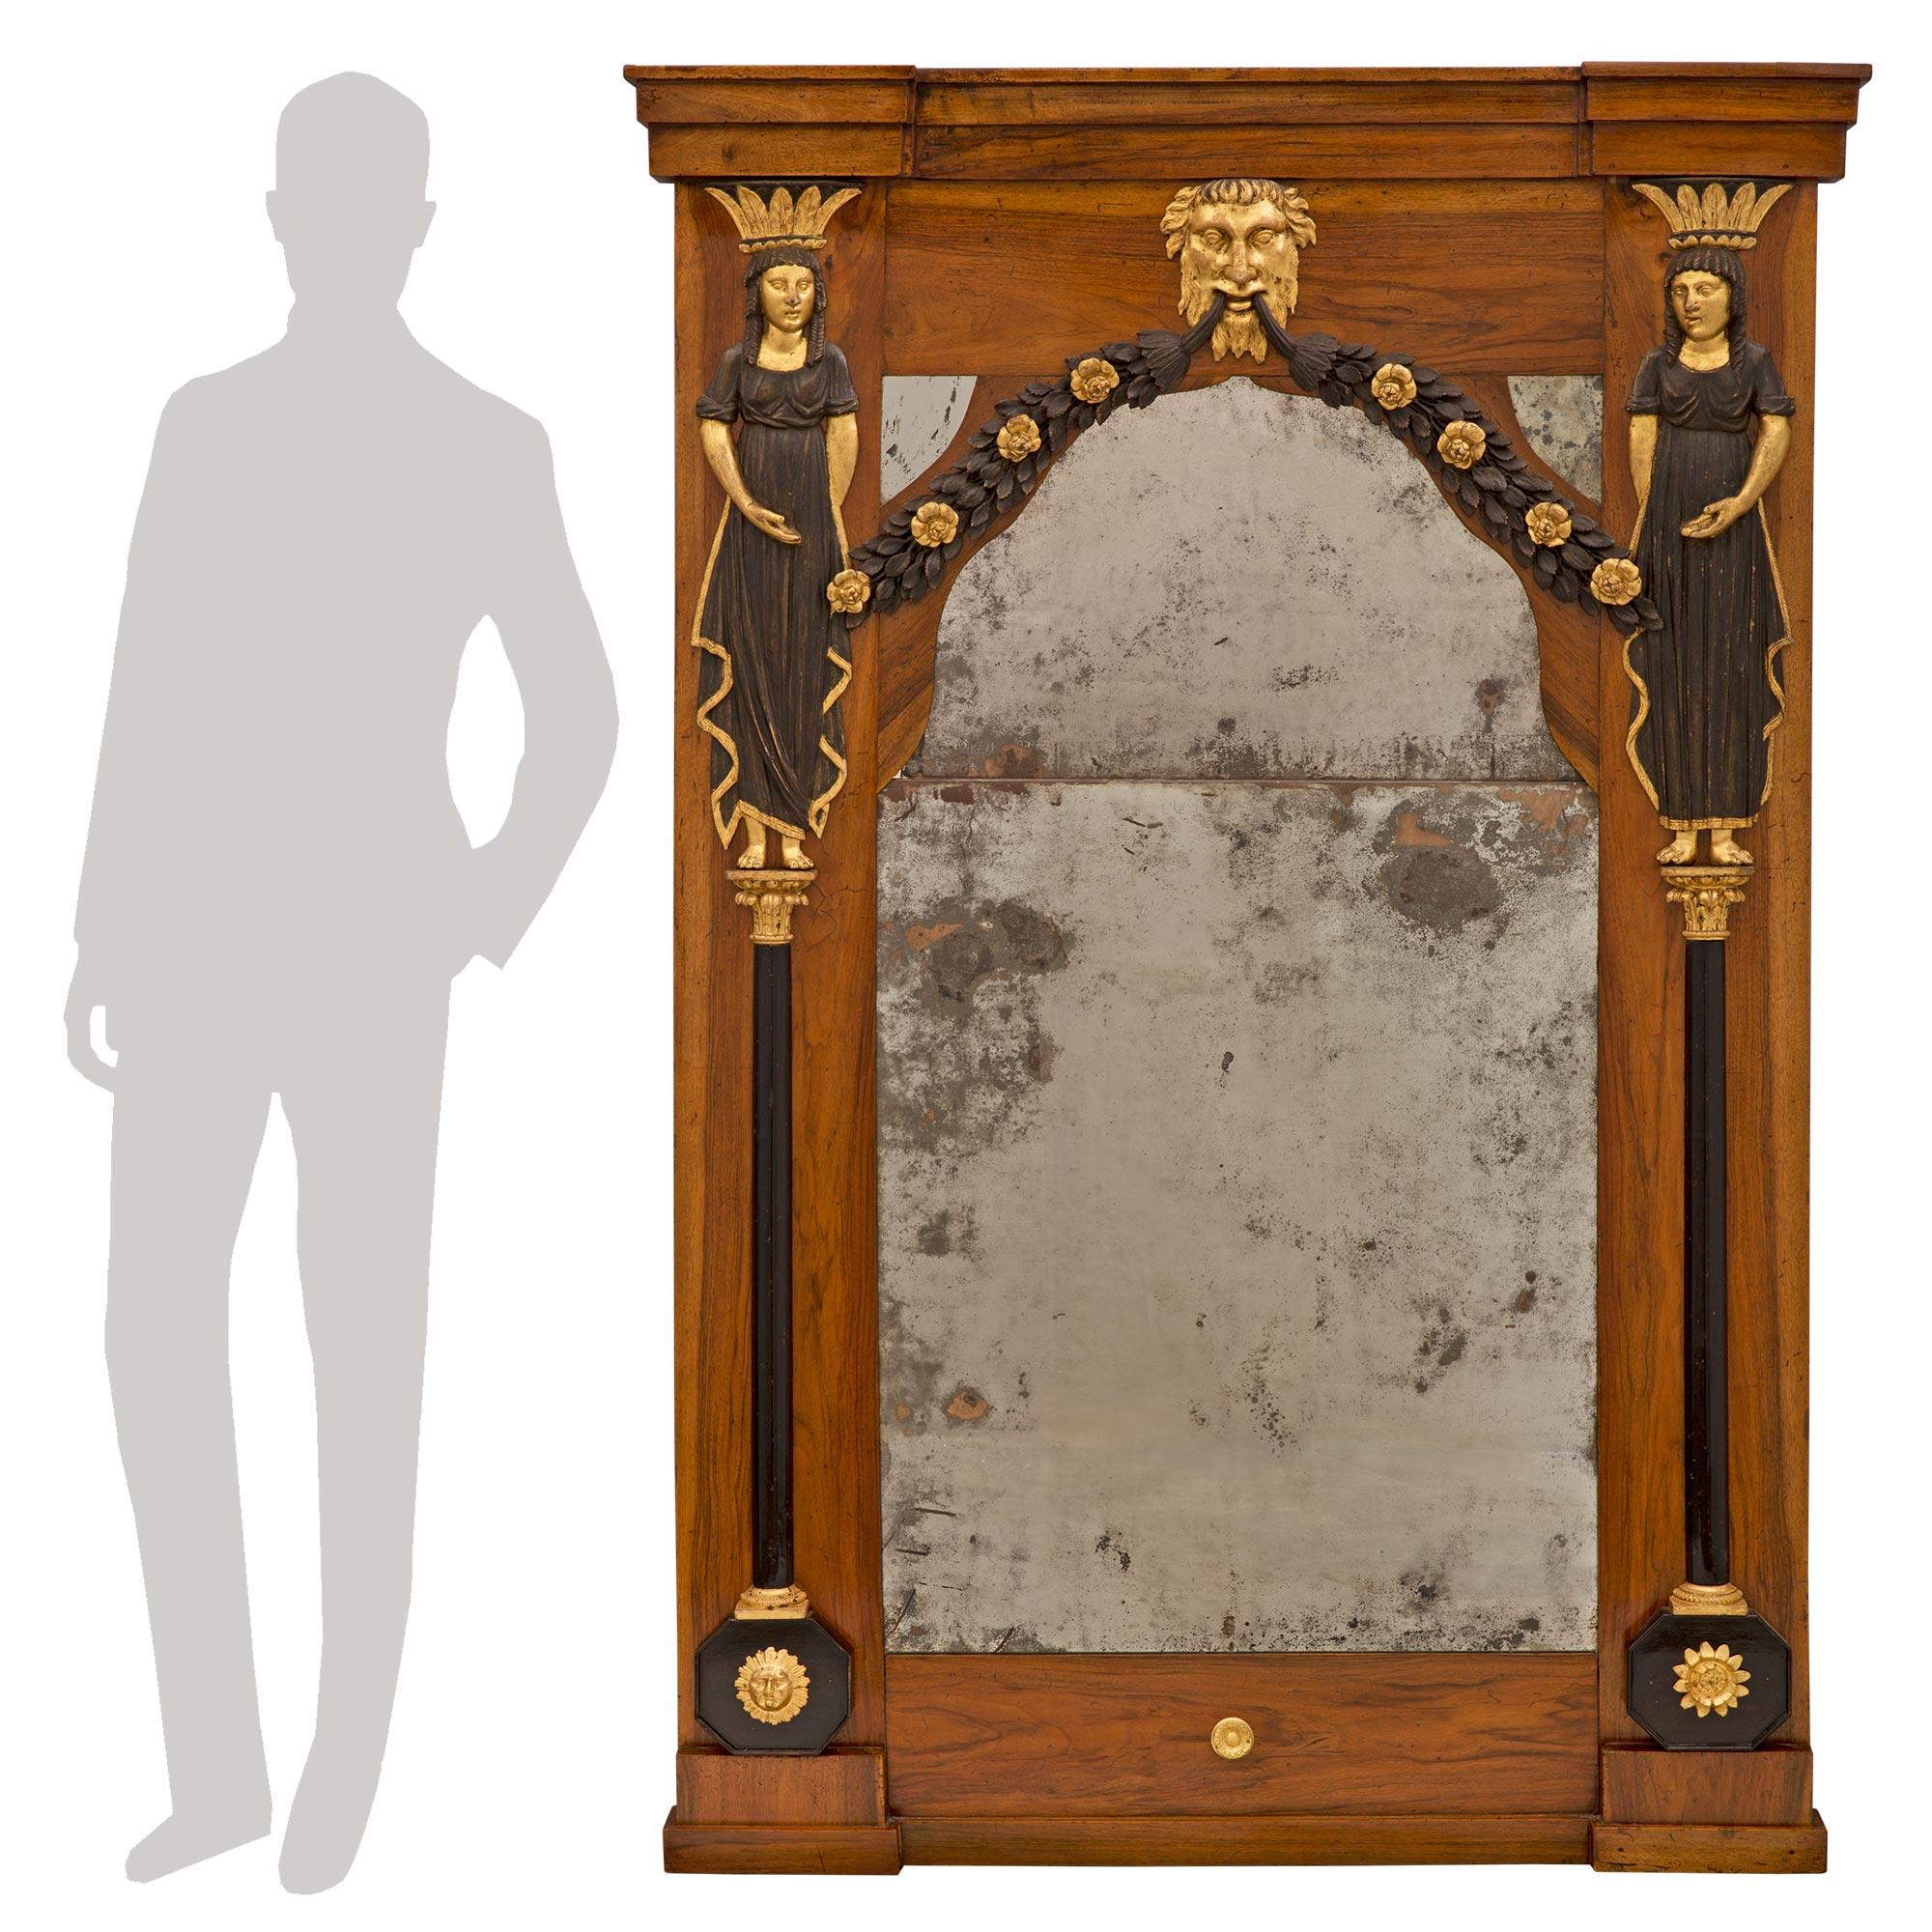 An exceptional Italian 18th century neo-classical st. walnut, giltwood, ebonized fruitwood and polychrome mirror. The mirror retains all of its original mirror plates throughout framed within a fine walnut border. Striking architectural columns